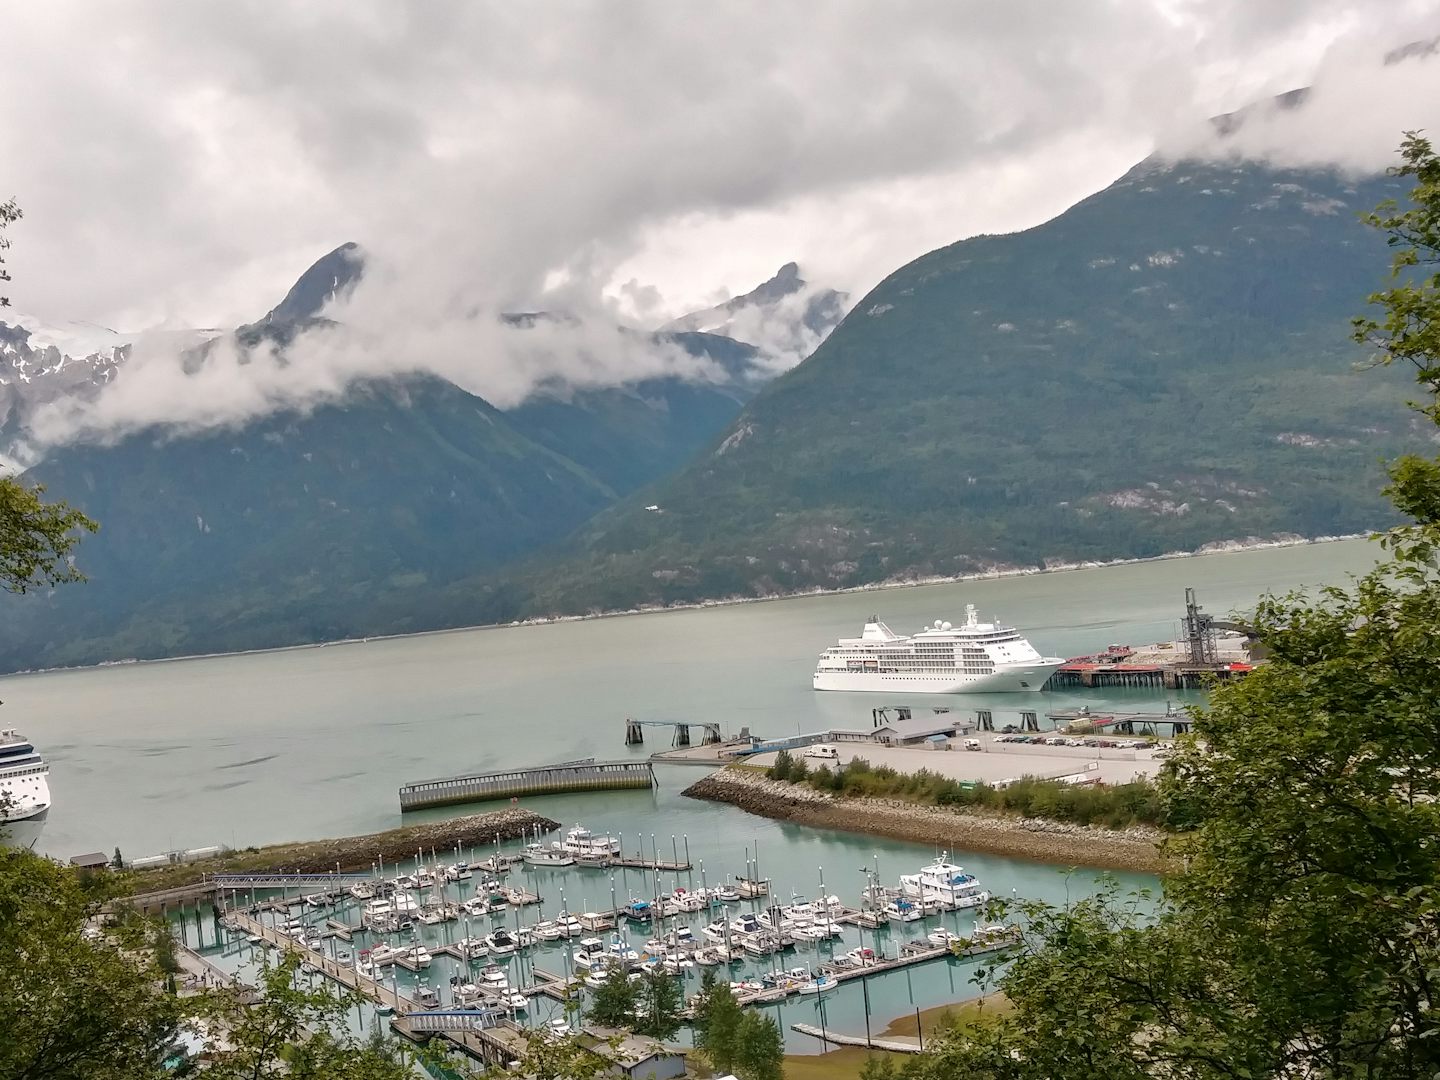 View of the cruise ship from hike up to Lower Dewy Lake.